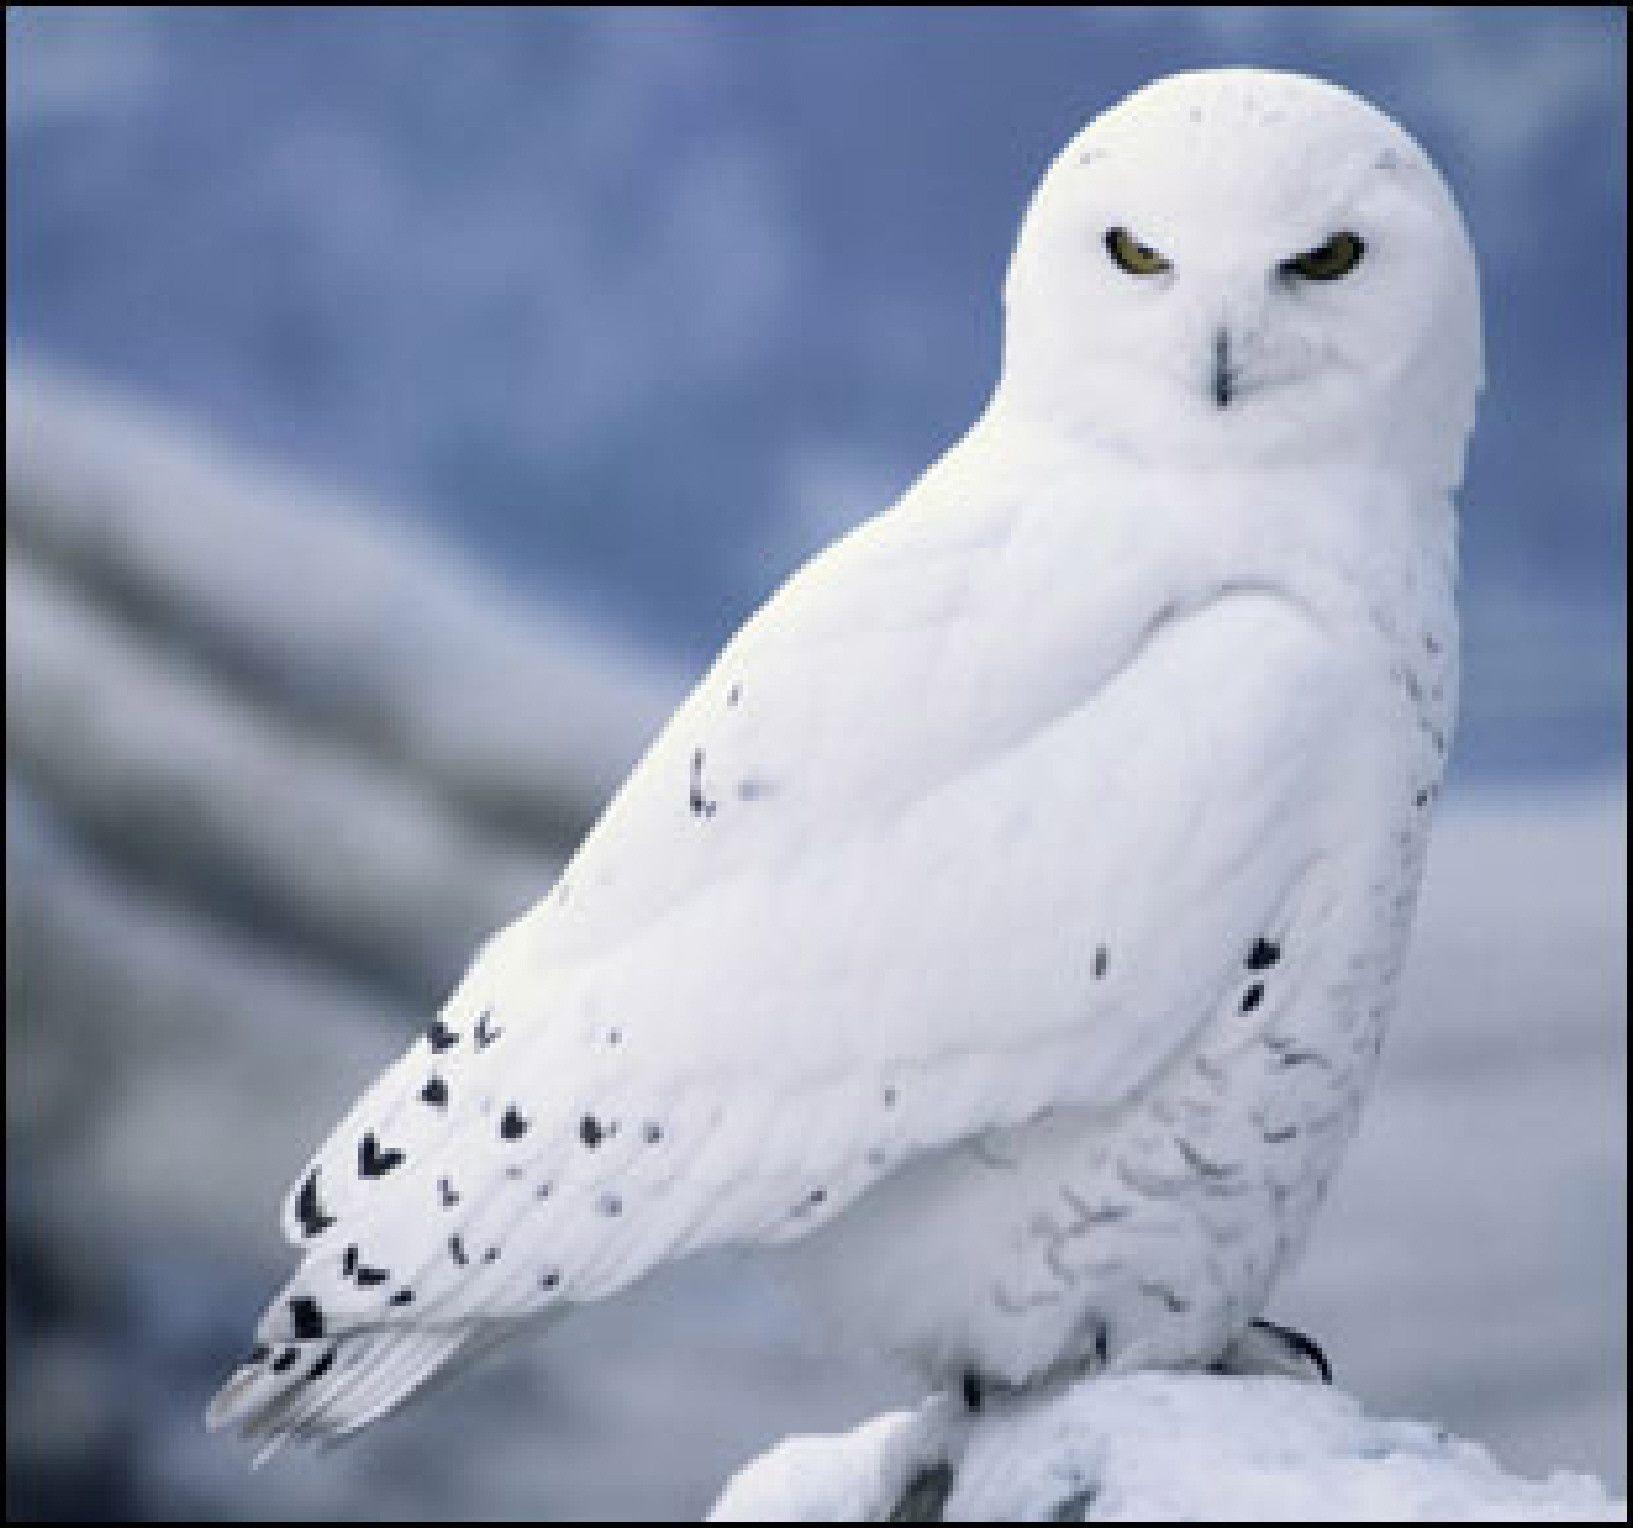 Desktop Wallpaper For Android Snowy Owl. Owls, Snowy, For, Owl